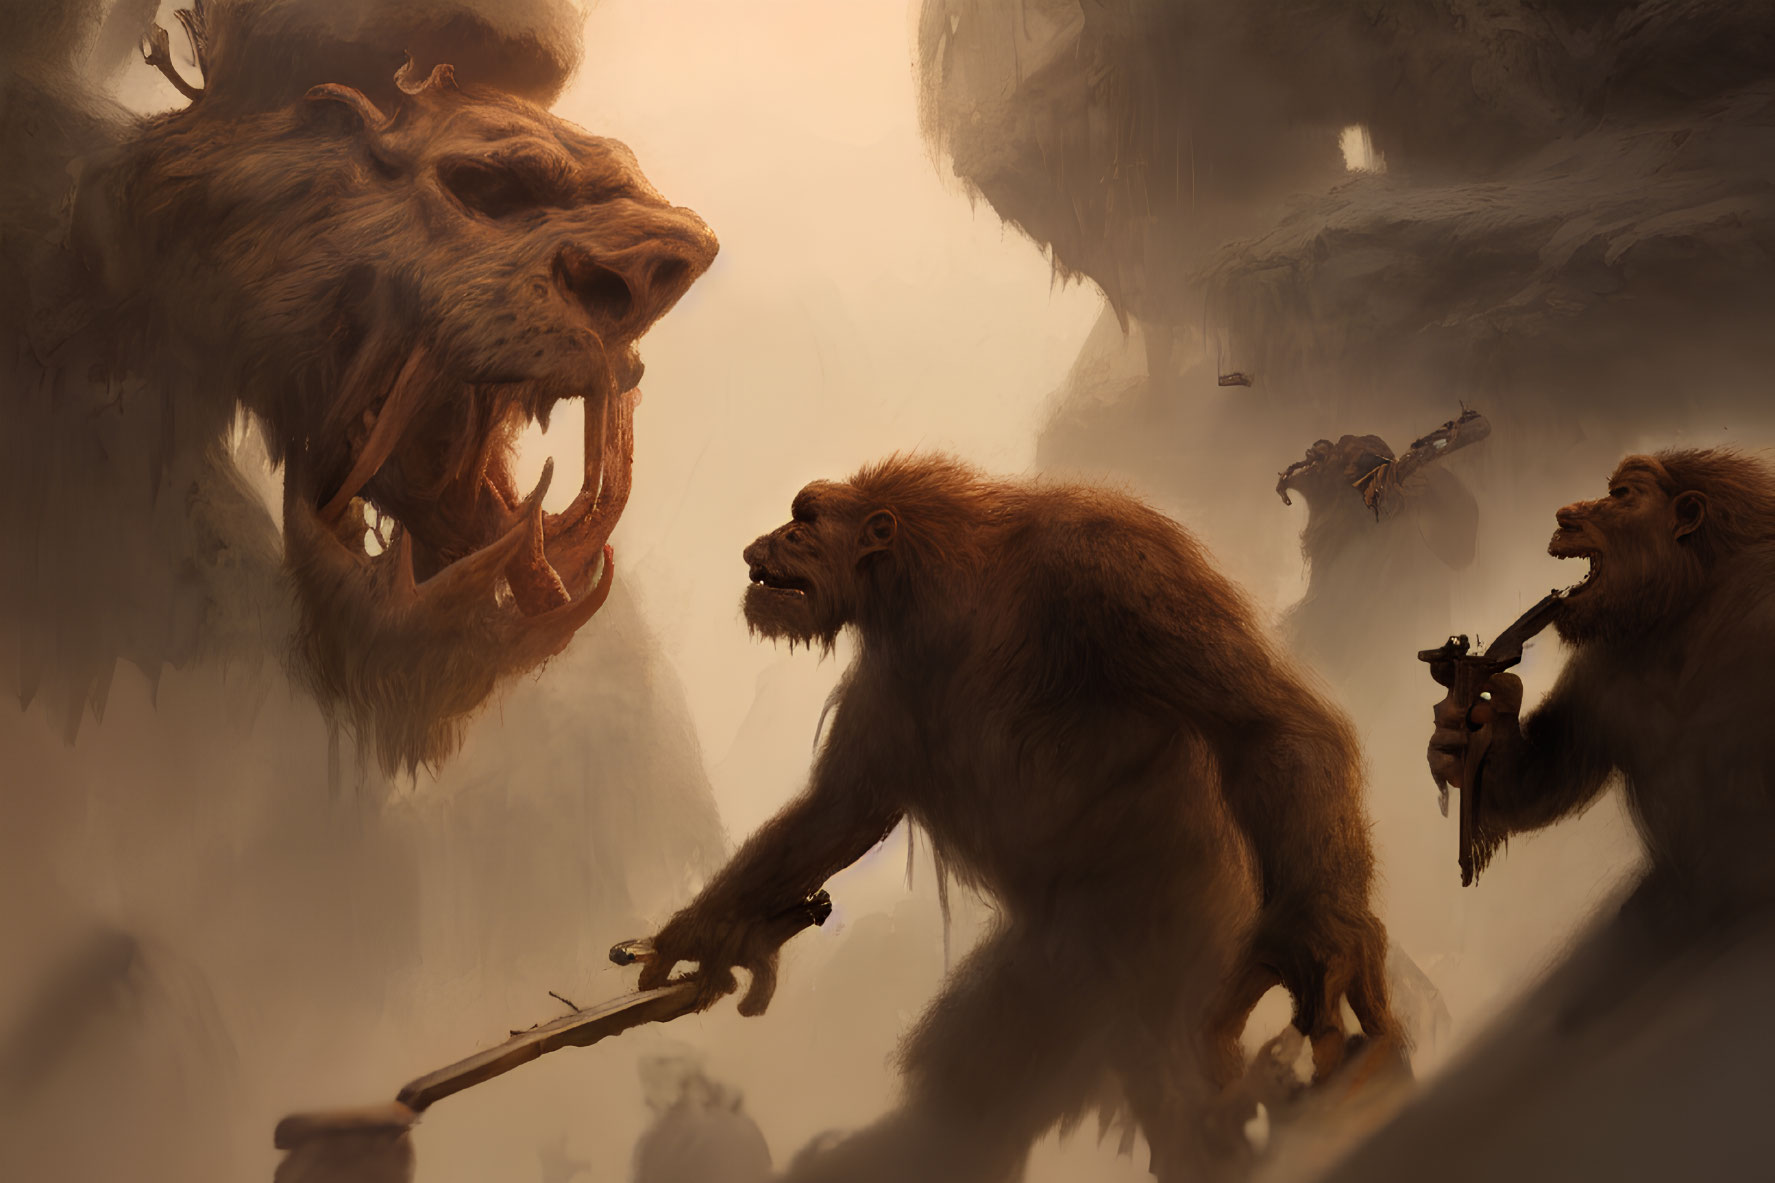 Fantasy scene with humanoid beasts, giant lion, in misty landscape